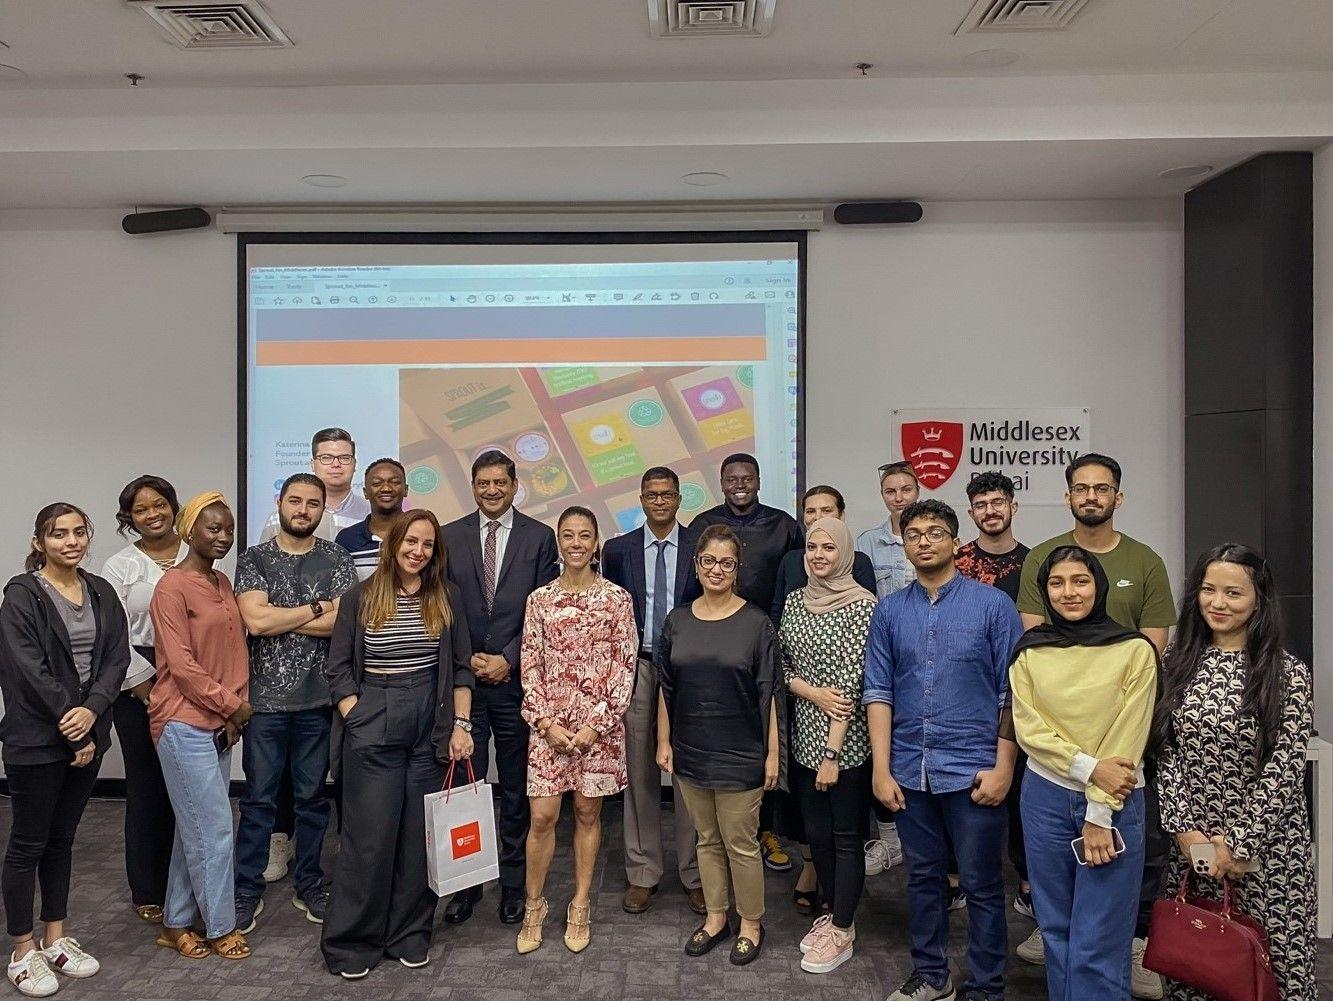 As part of their Postgraduate Marketing studies, our students had the opportunity to take part in a transformative experiential learning experience during an exciting Residential Week, which ran from 27 February to 3 March 2023 at our campus in Dubai.